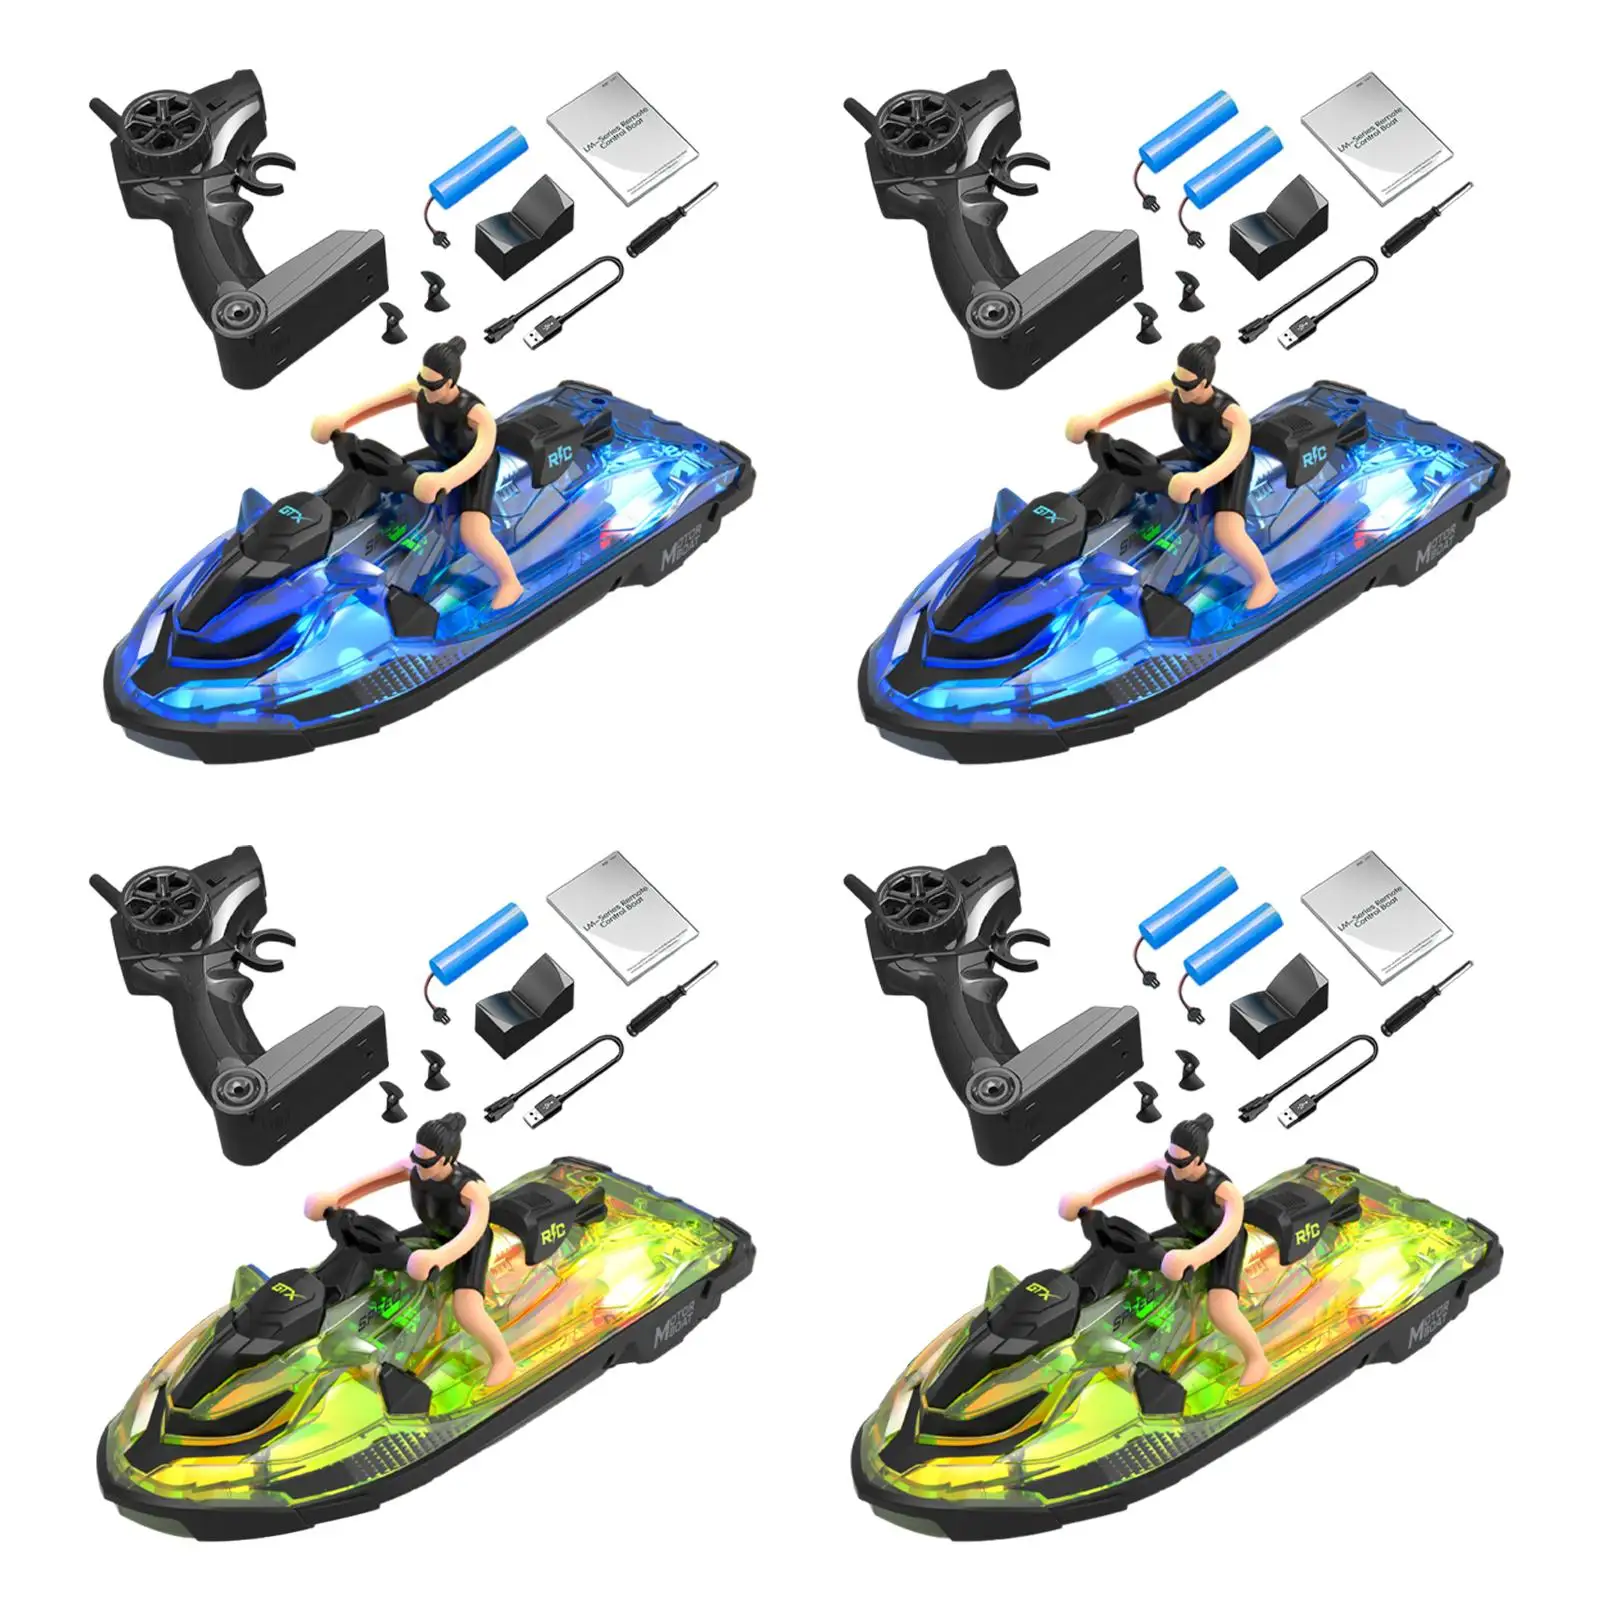 RC Speed Boat Flexible High Sensitivity Motorboat High Speed RC Boat Speedboat for Kids Boys Girls Adults Birthday Gifts